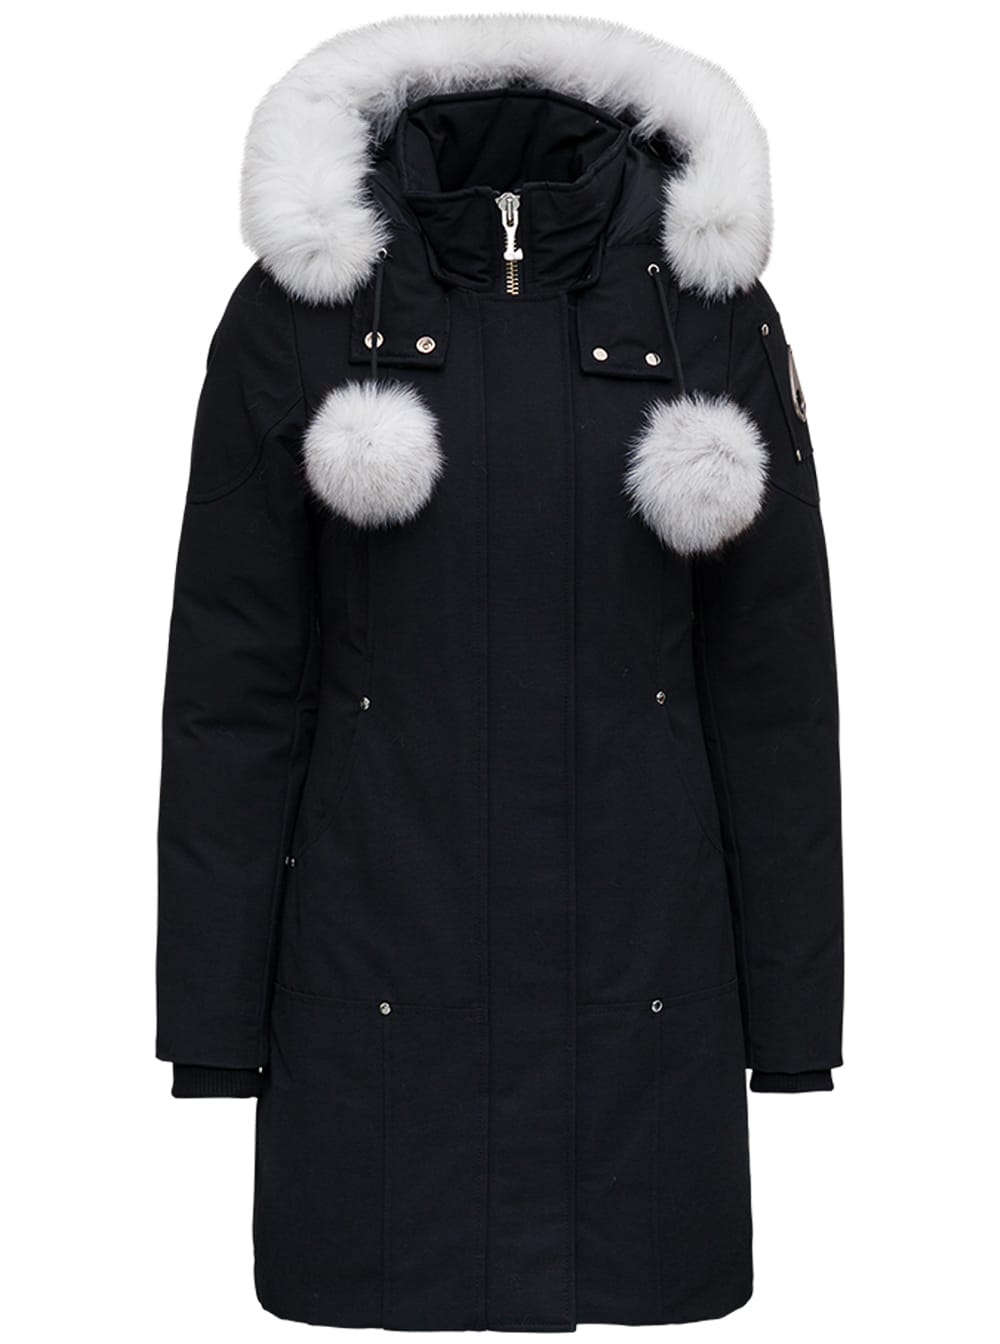 Moose Knuckles Stirling Parka Nylon And Cotton Long Down Jacket